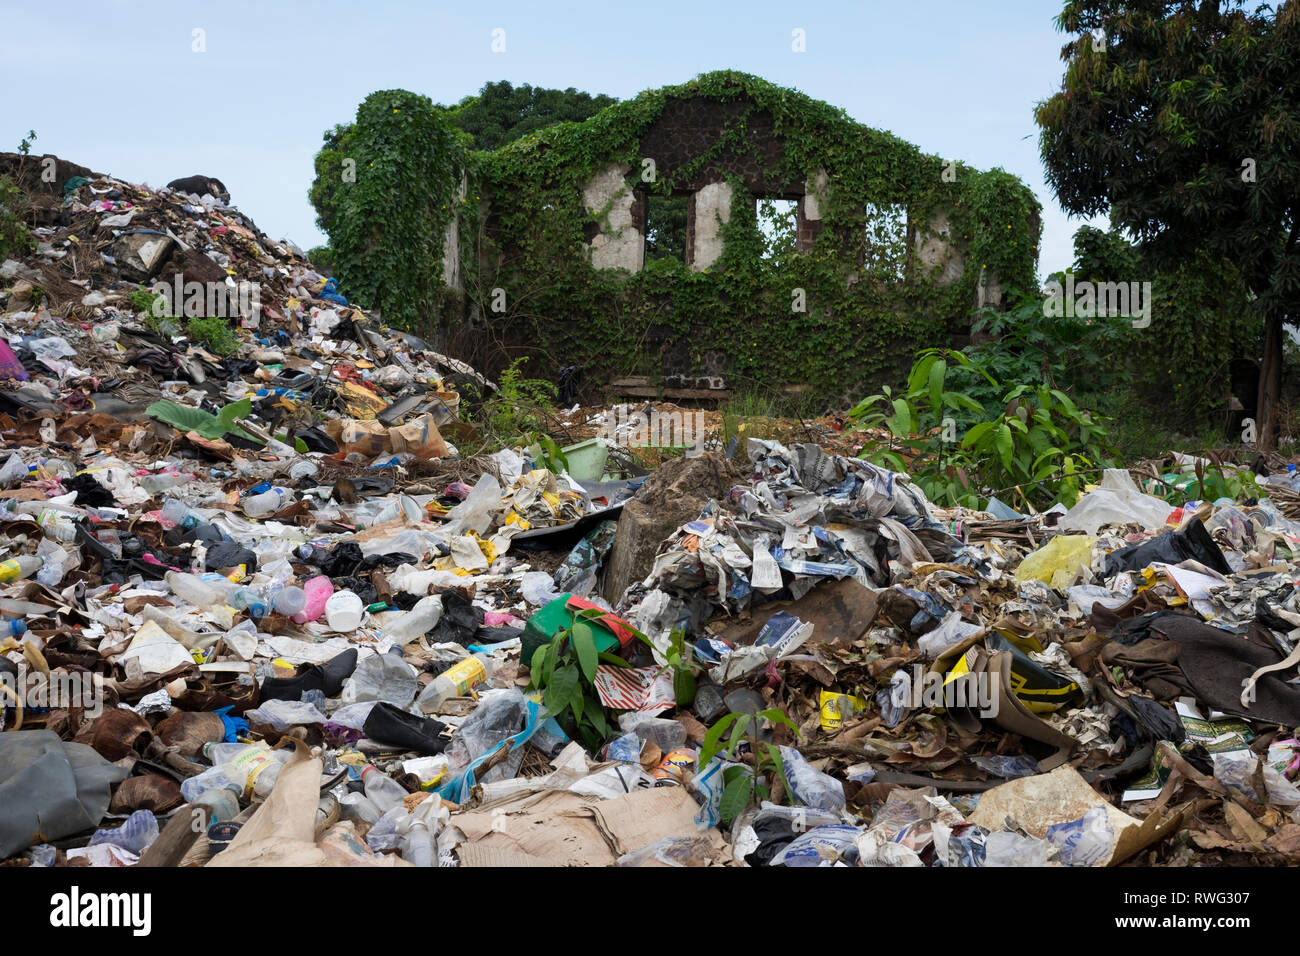 Trash piles up around a building ruin in Freetown, Sierra Leone. Stock Photo